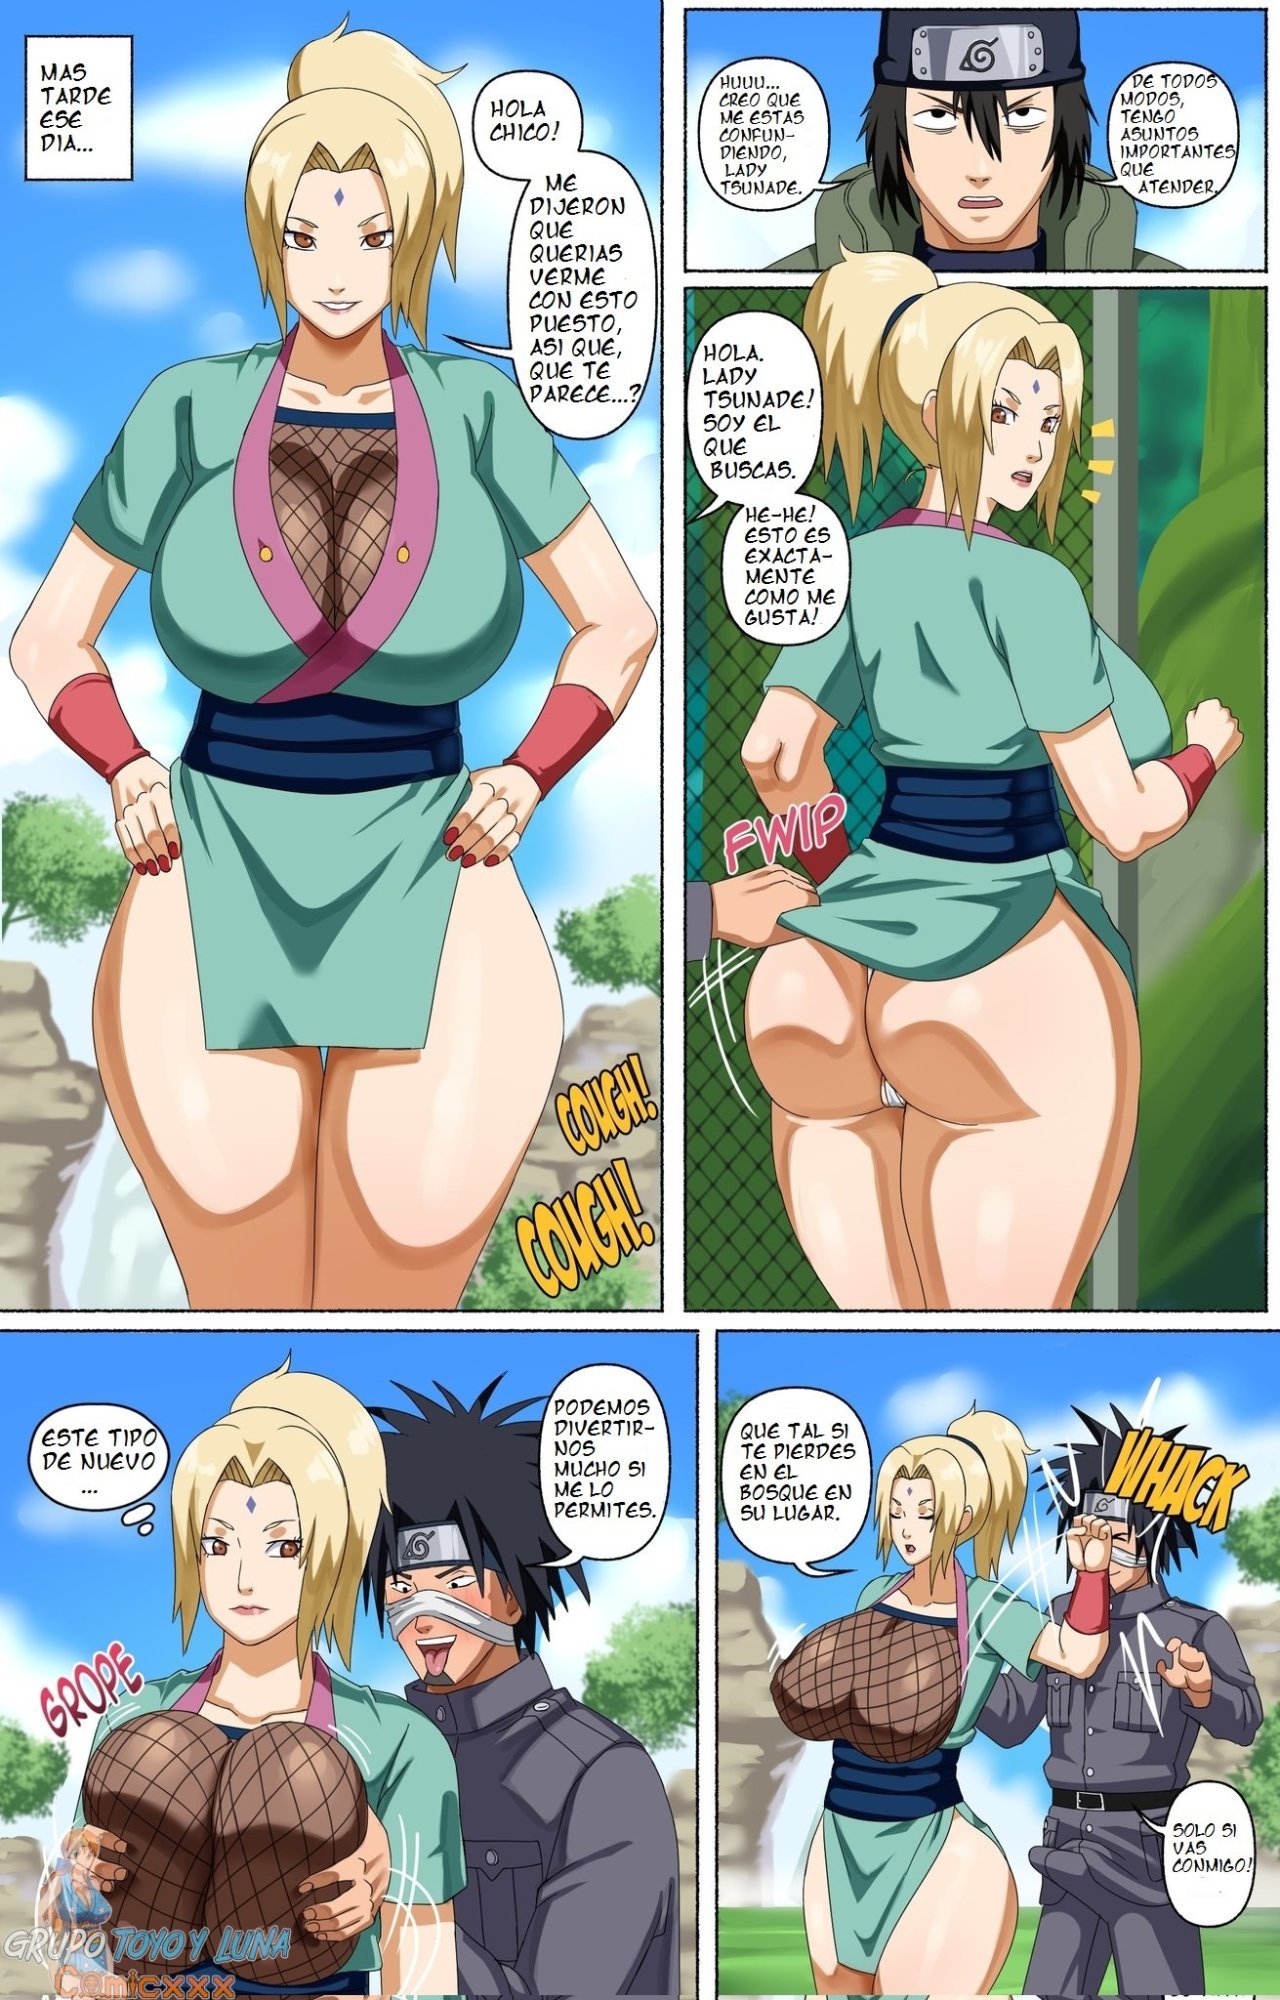 Tsunade and his assistants - 14